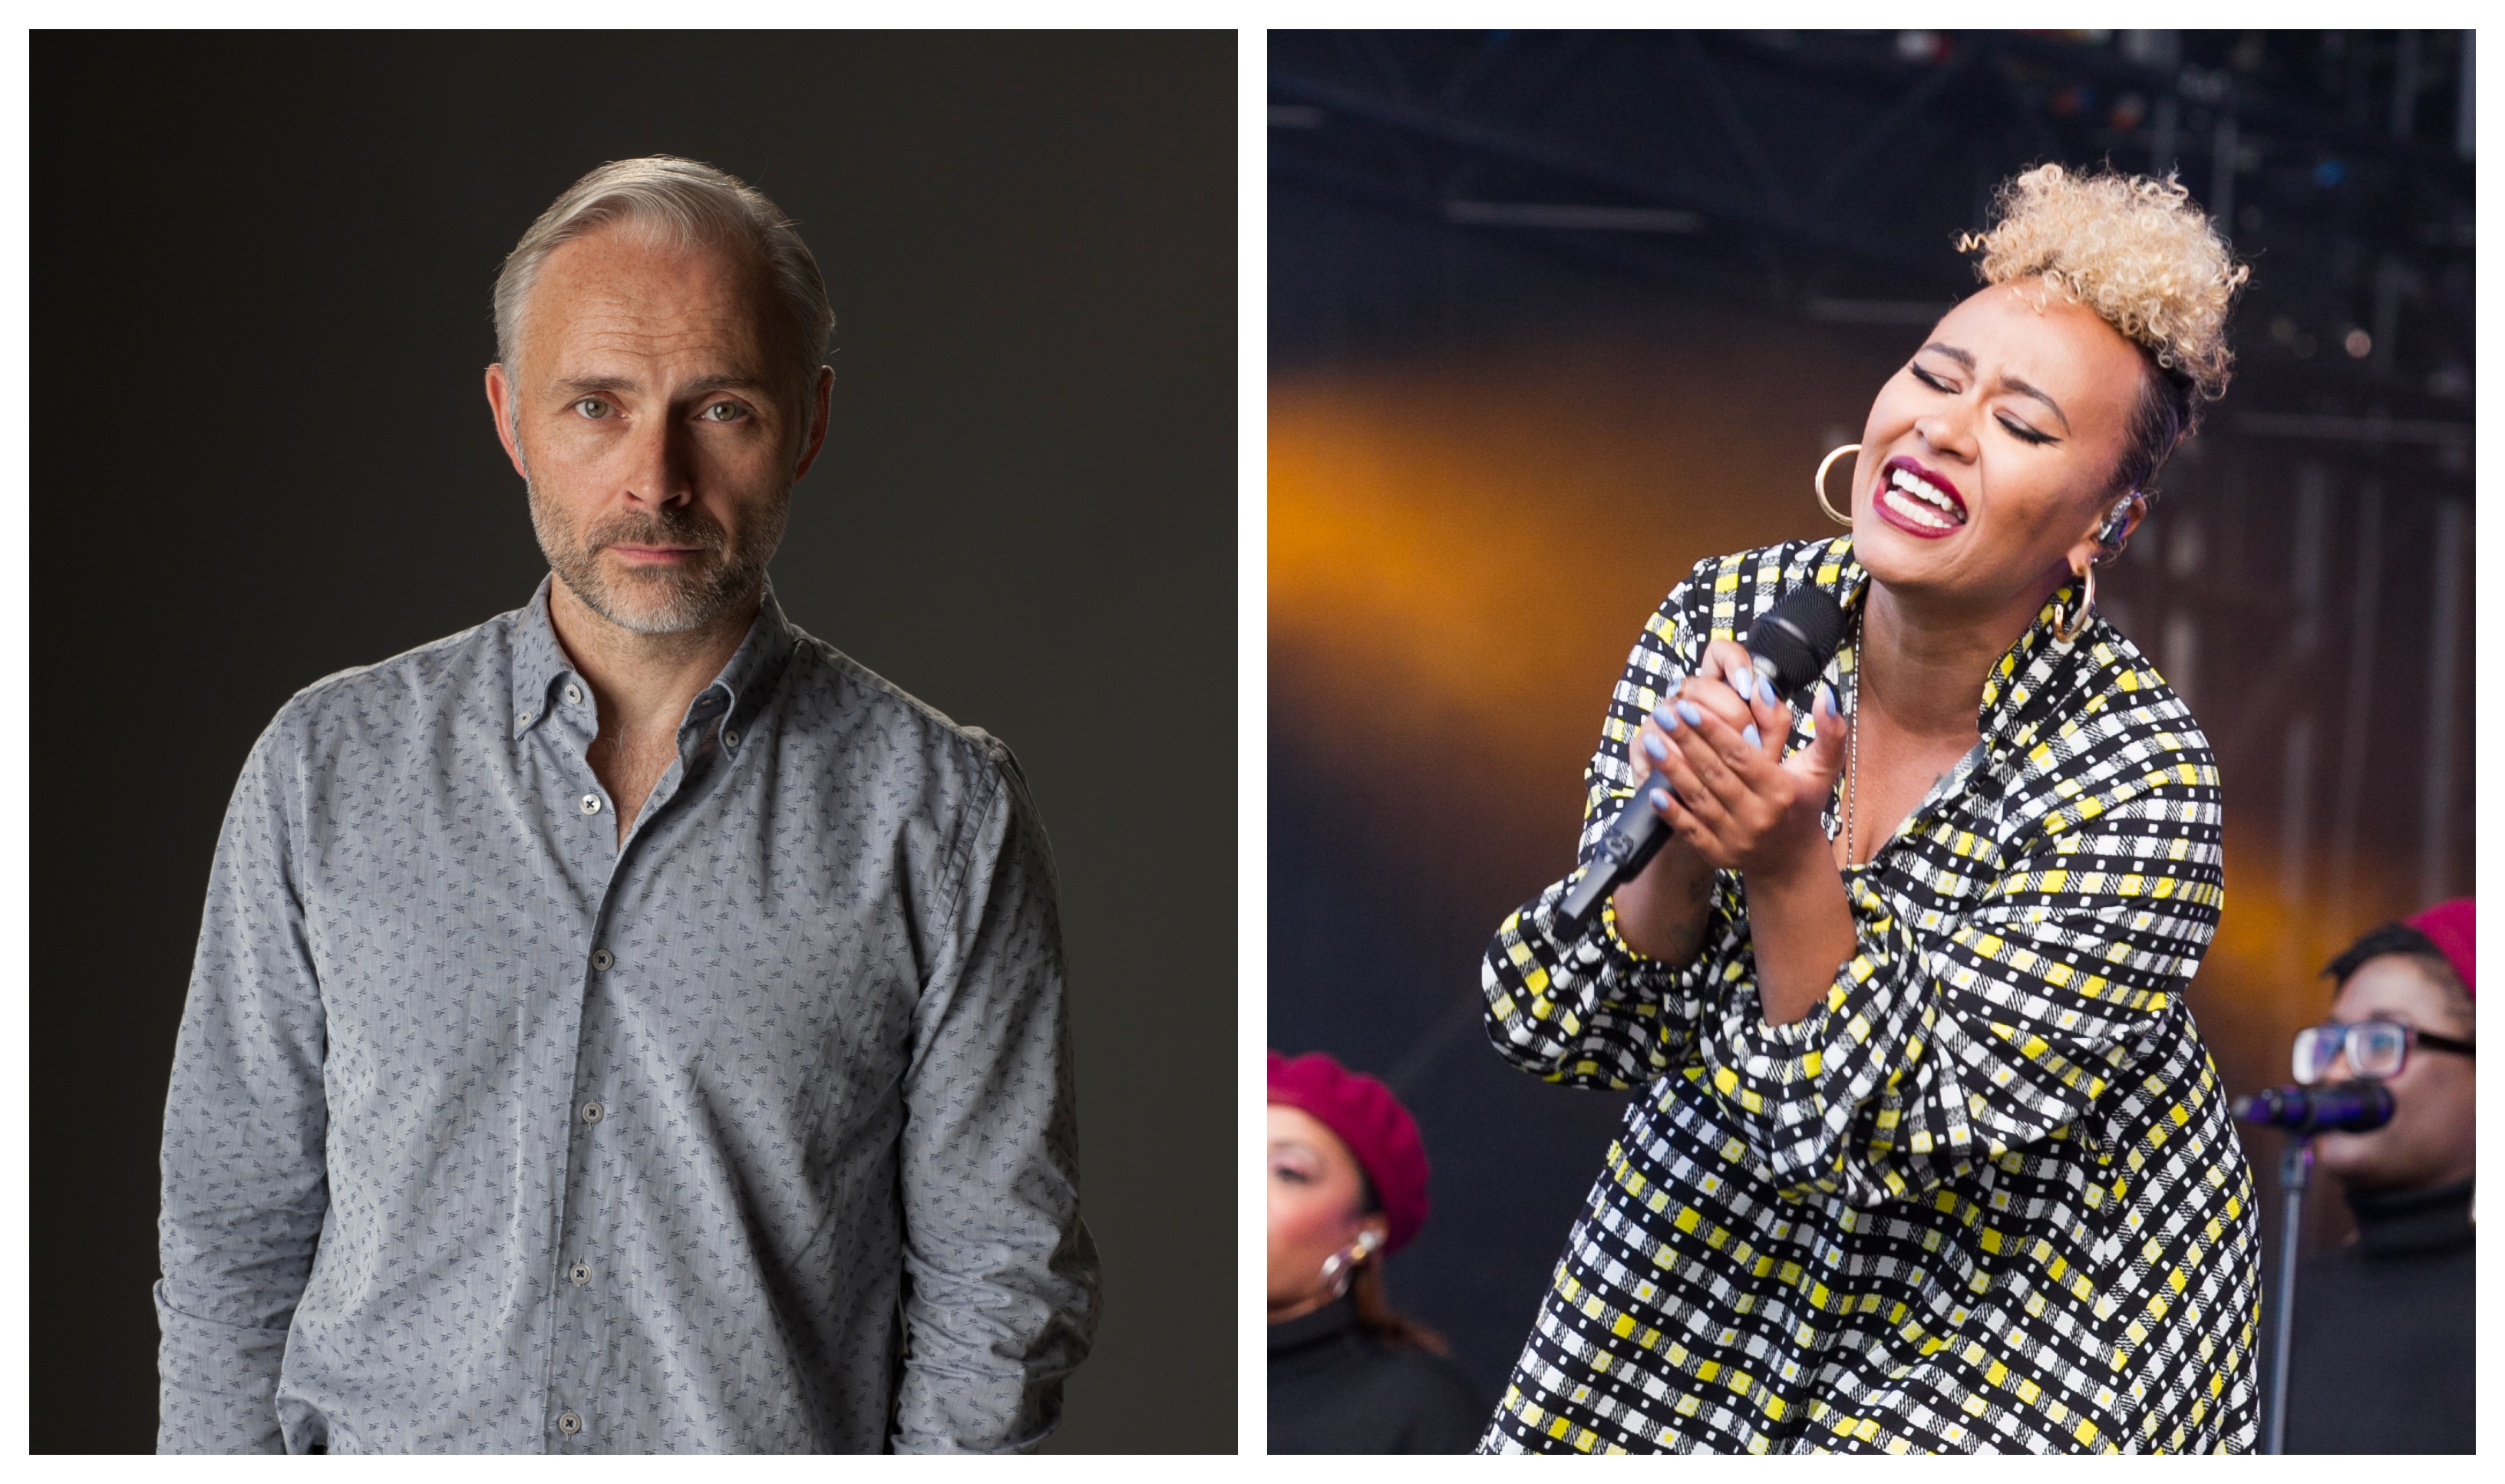 Mark Bonnar and Emeli Sandé are among the line-up for the new channel